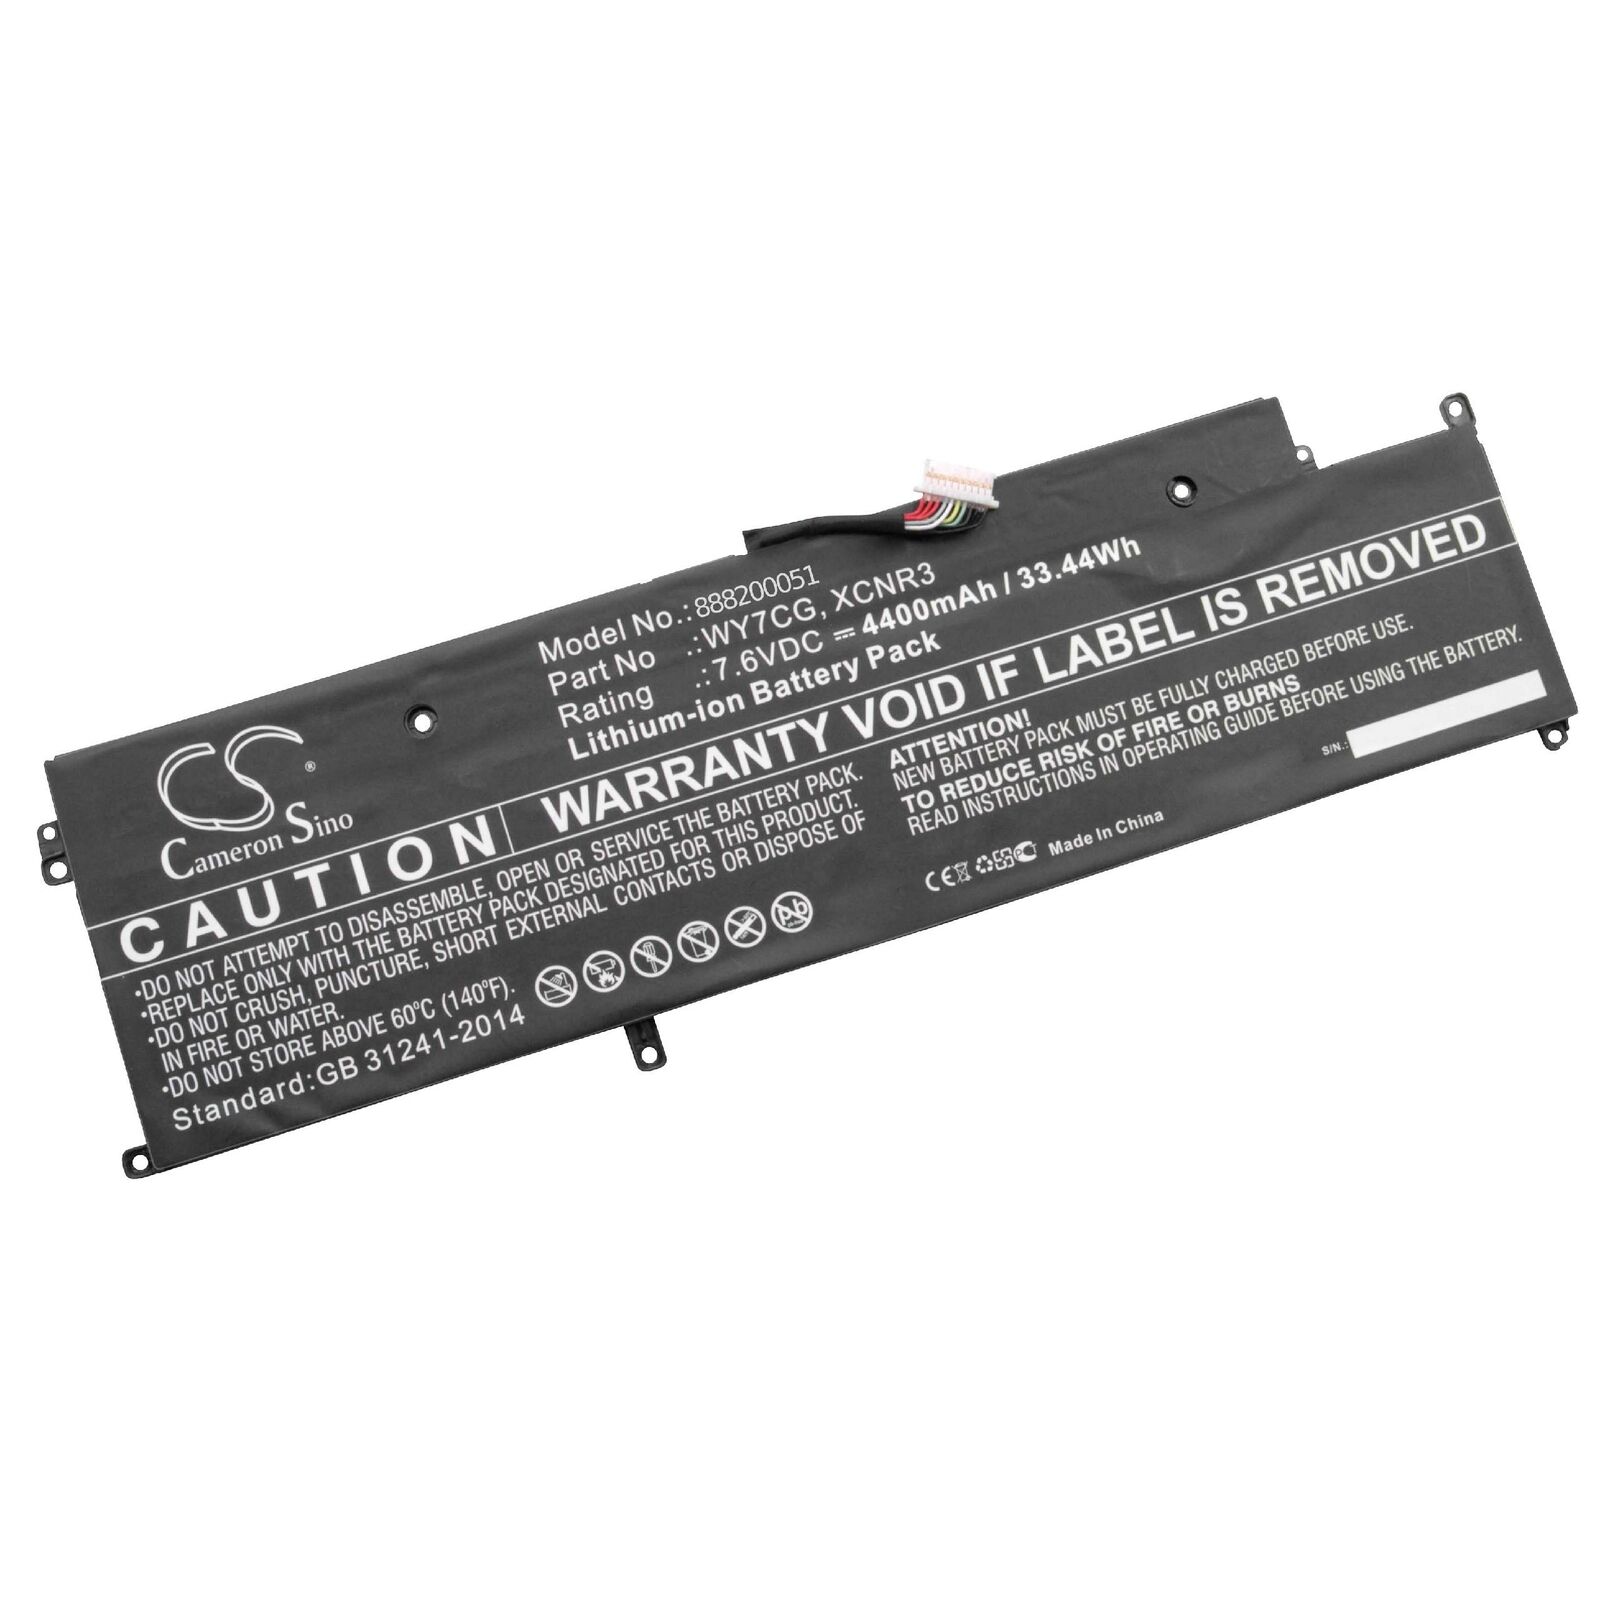 XCNR3 Dell Latitude 13 7000 Series 7370 E7370 P63NY N3KPR 4H34M WY7CG compatible battery